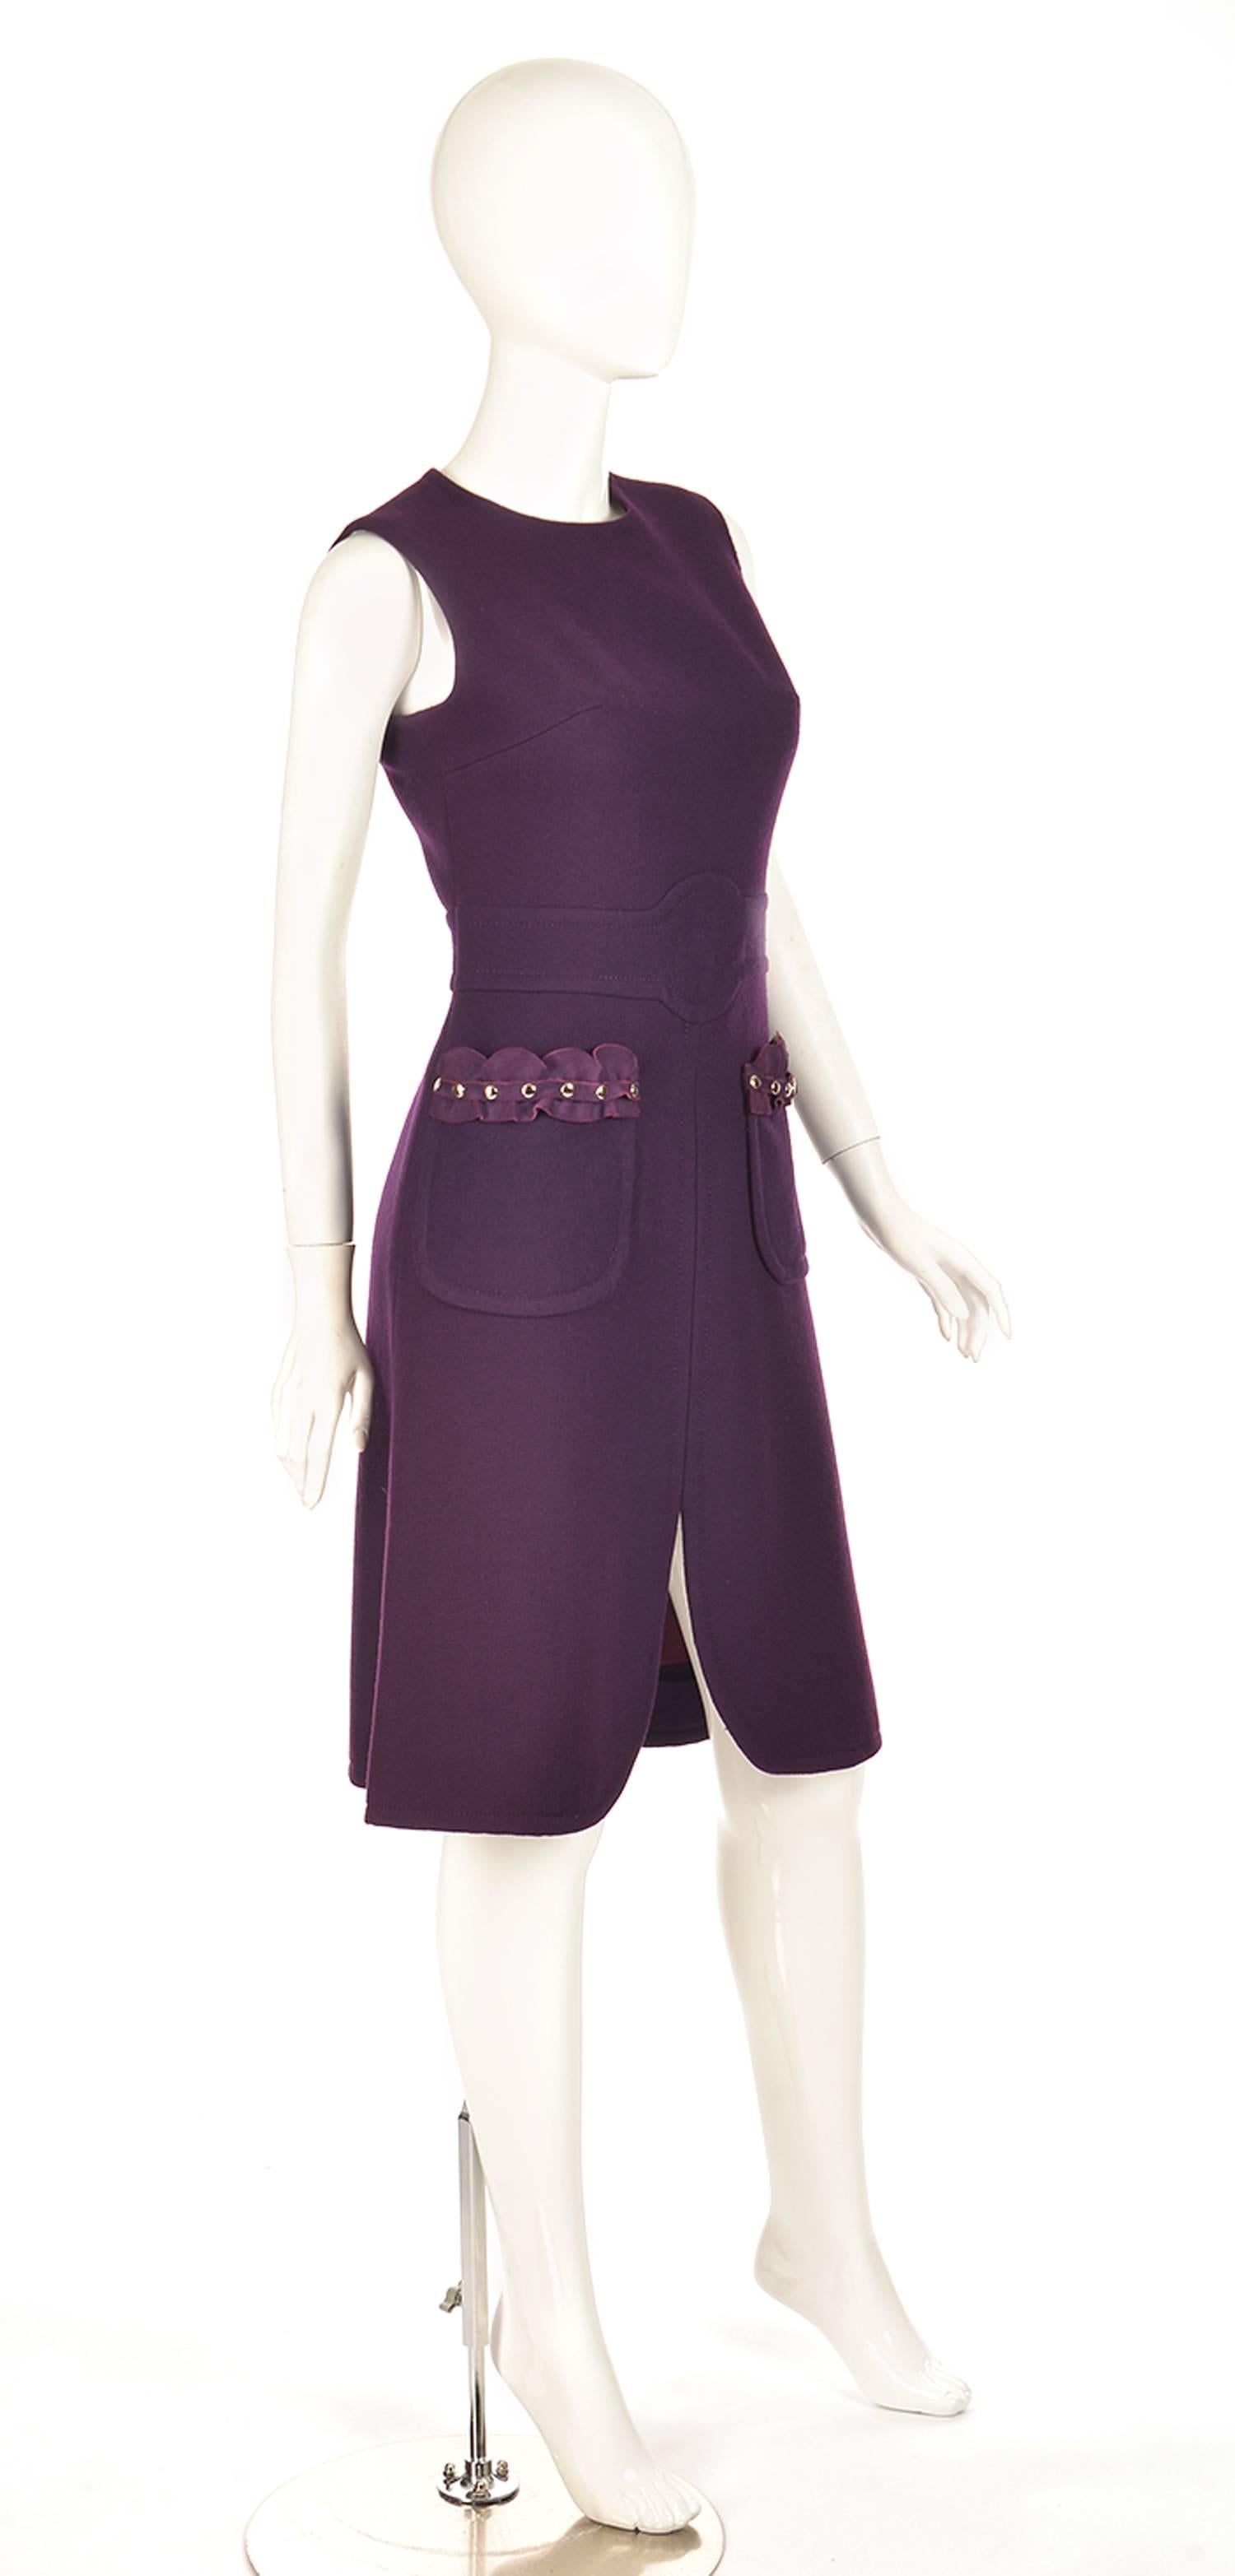 
Rare.... this wool sleeveless, crewneck sheath dress by Pierre Cardin is absolutely charming! The dress features a belt-like center waist panel and a tulip-like slit in the center of the front of the dress. The dress' two curved front pockets are